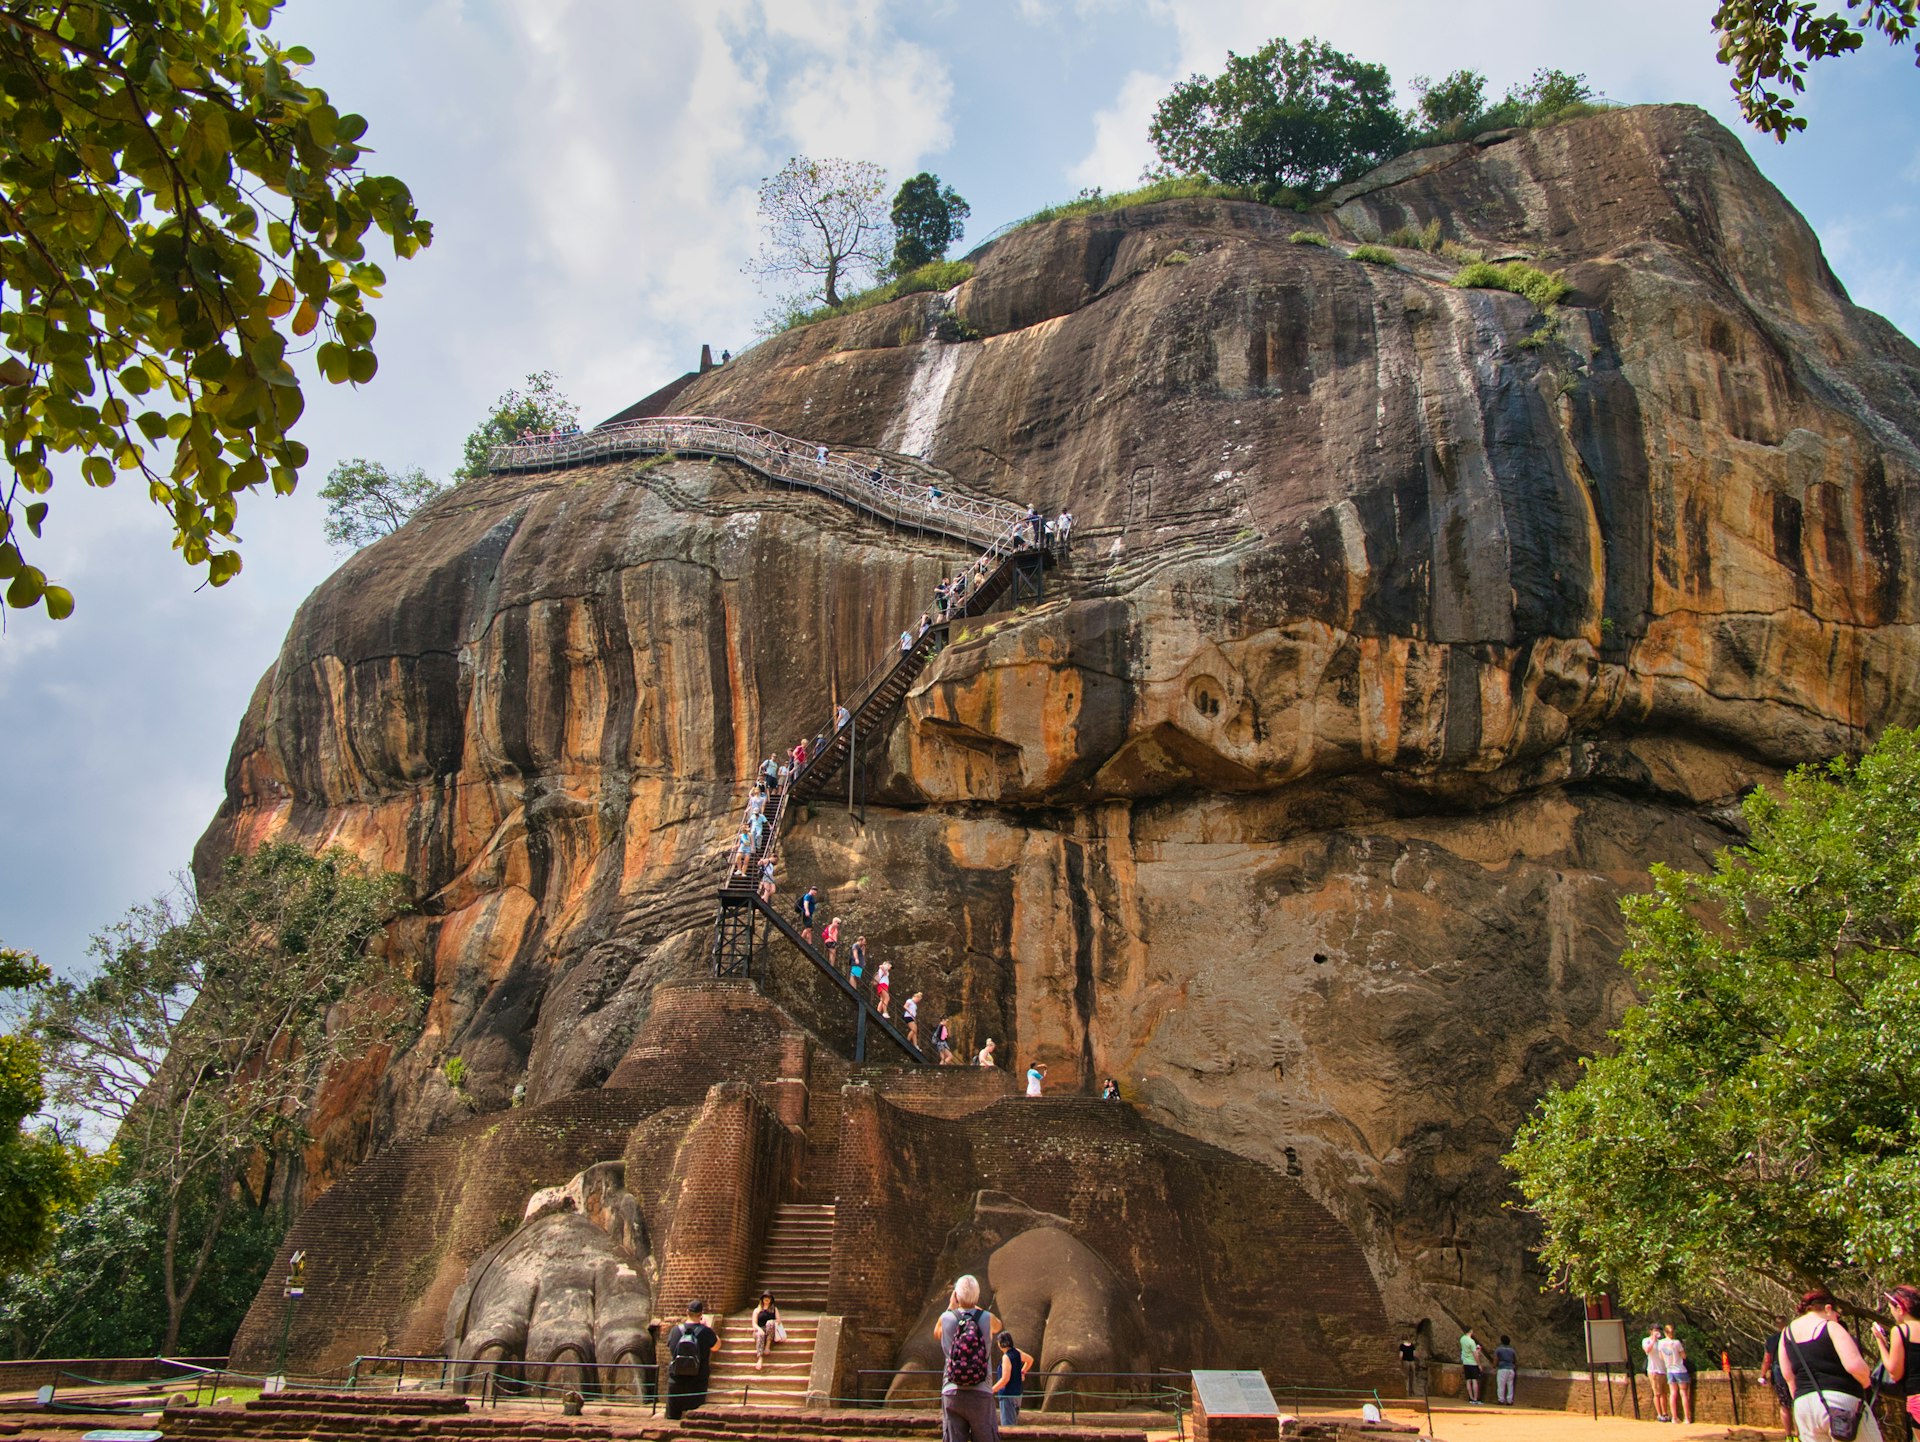 Above the Lion Gate, many tourists ascend and descend the steep stairs to the top of the ancient rock fortress of Sigiriya or Lion Rock in central Sri Lanka